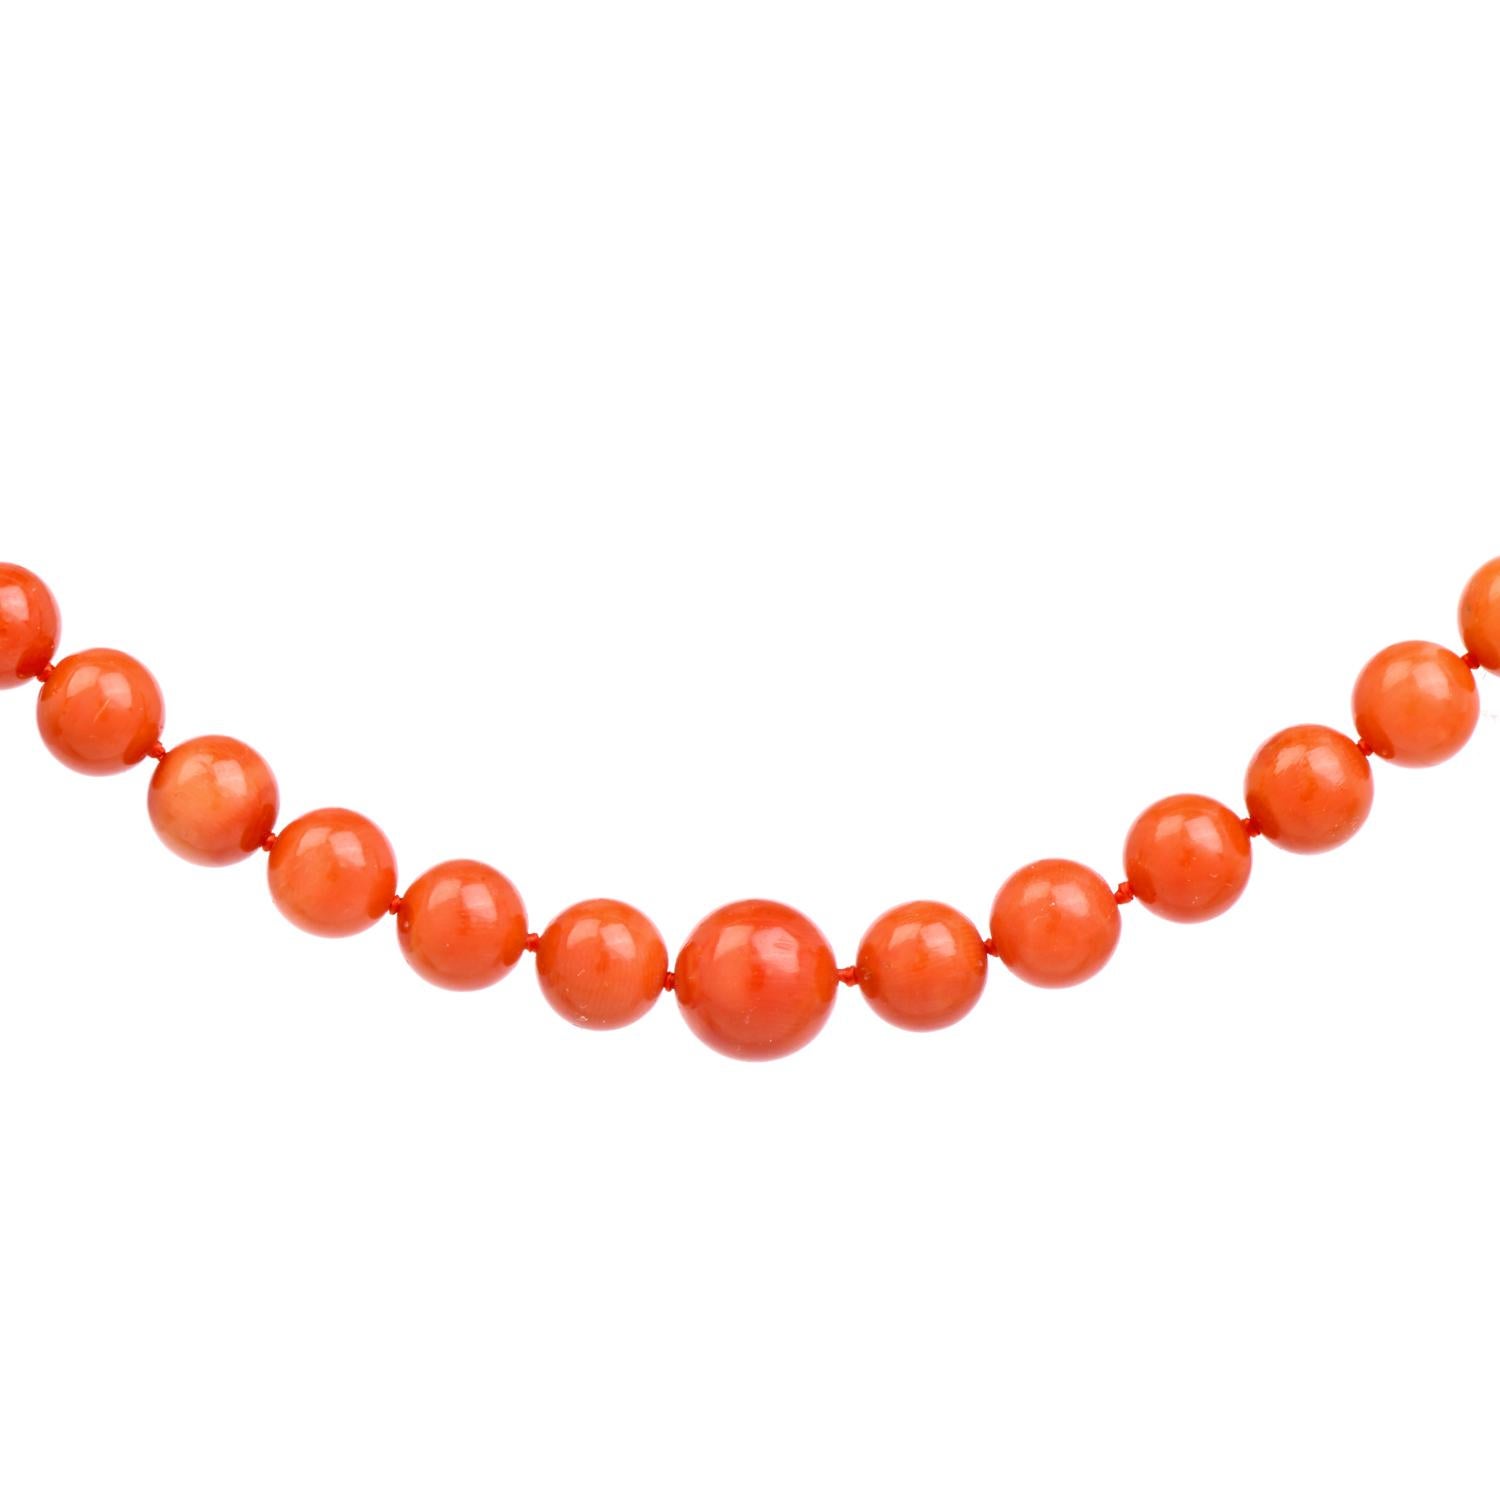 This striking Natural Red Coral 68 Bead Necklace spans 22 inches around the neck or can be wrapped around your wrist for more flexible wear.

These Natural coral beads measure from 10mm to 8mm beads and are secured by a Chinese-designed gold 14k